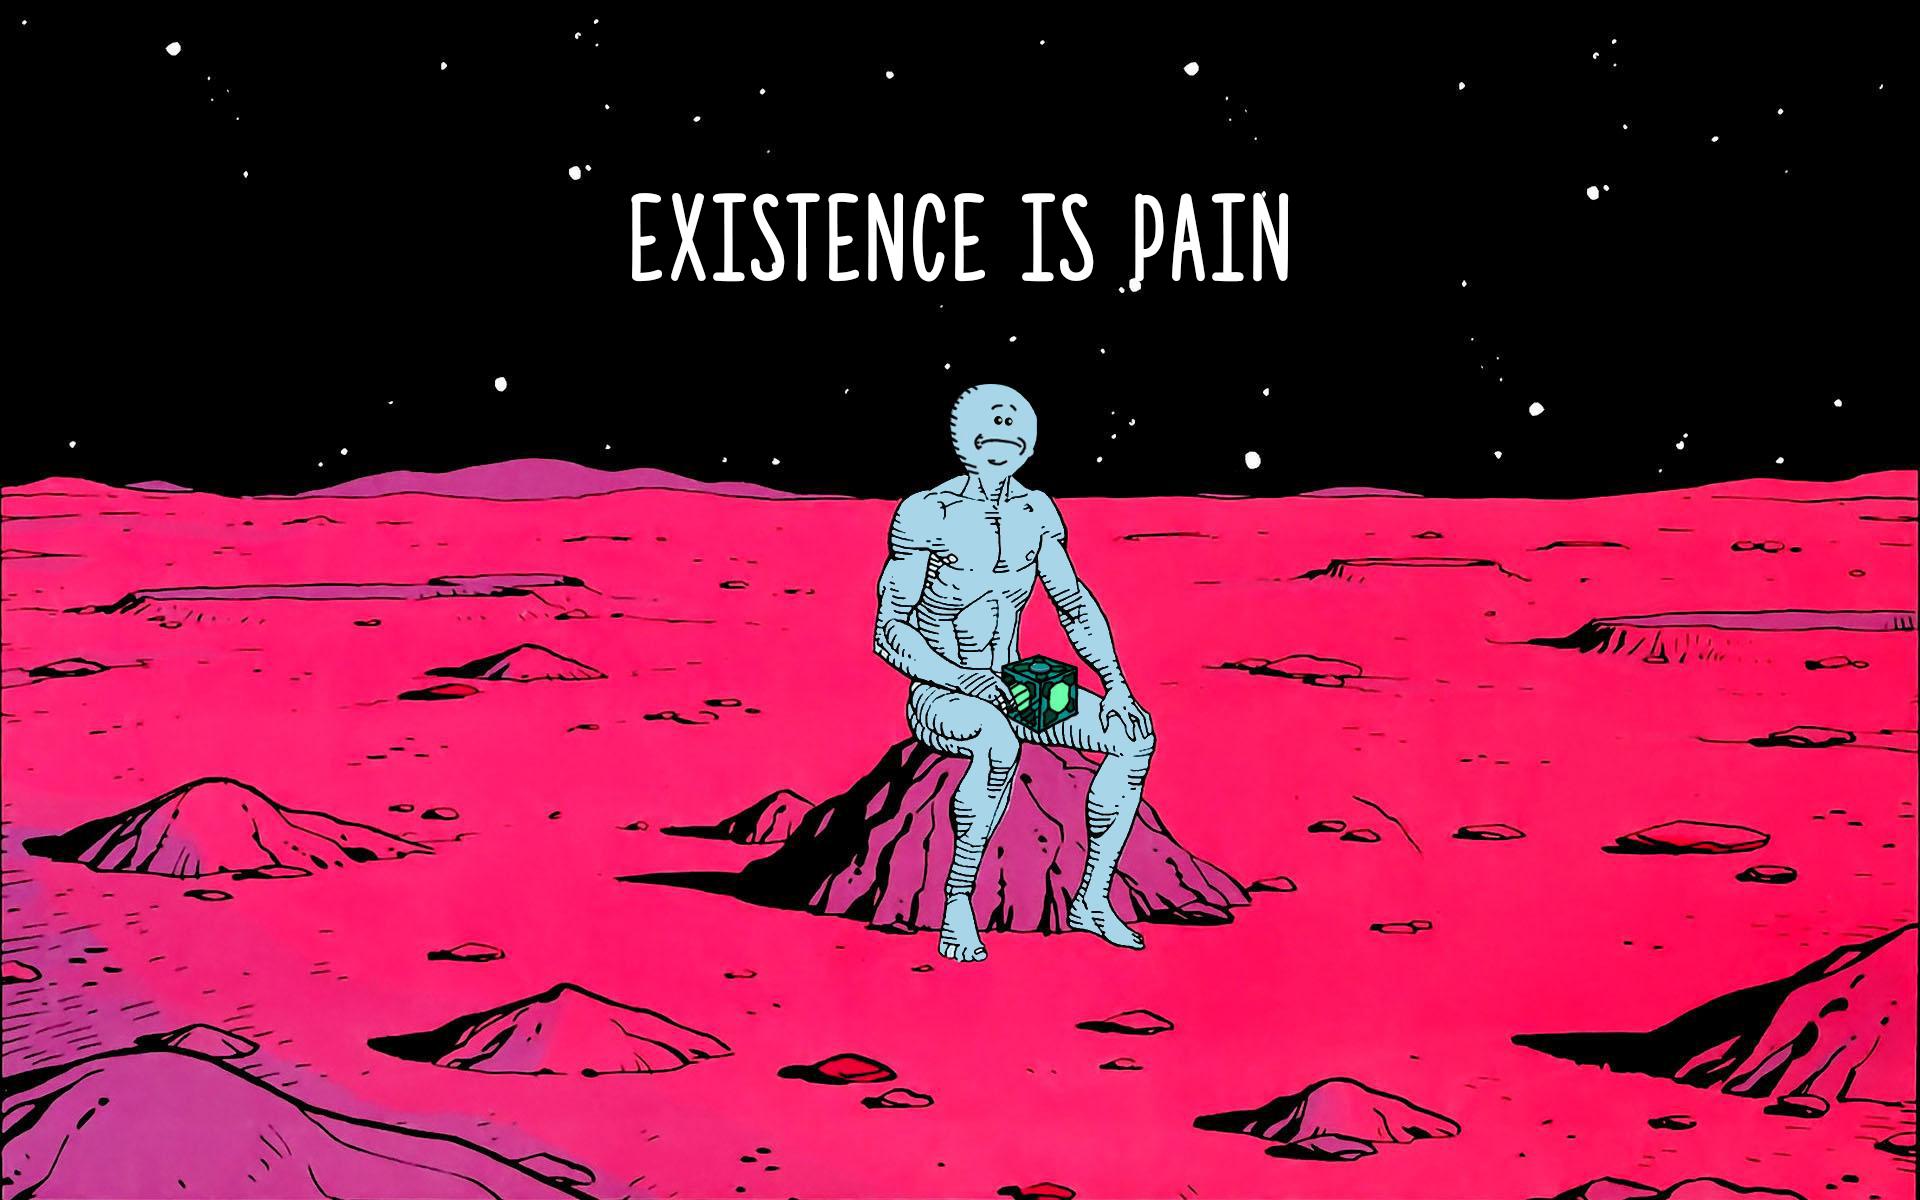 Existence is pain